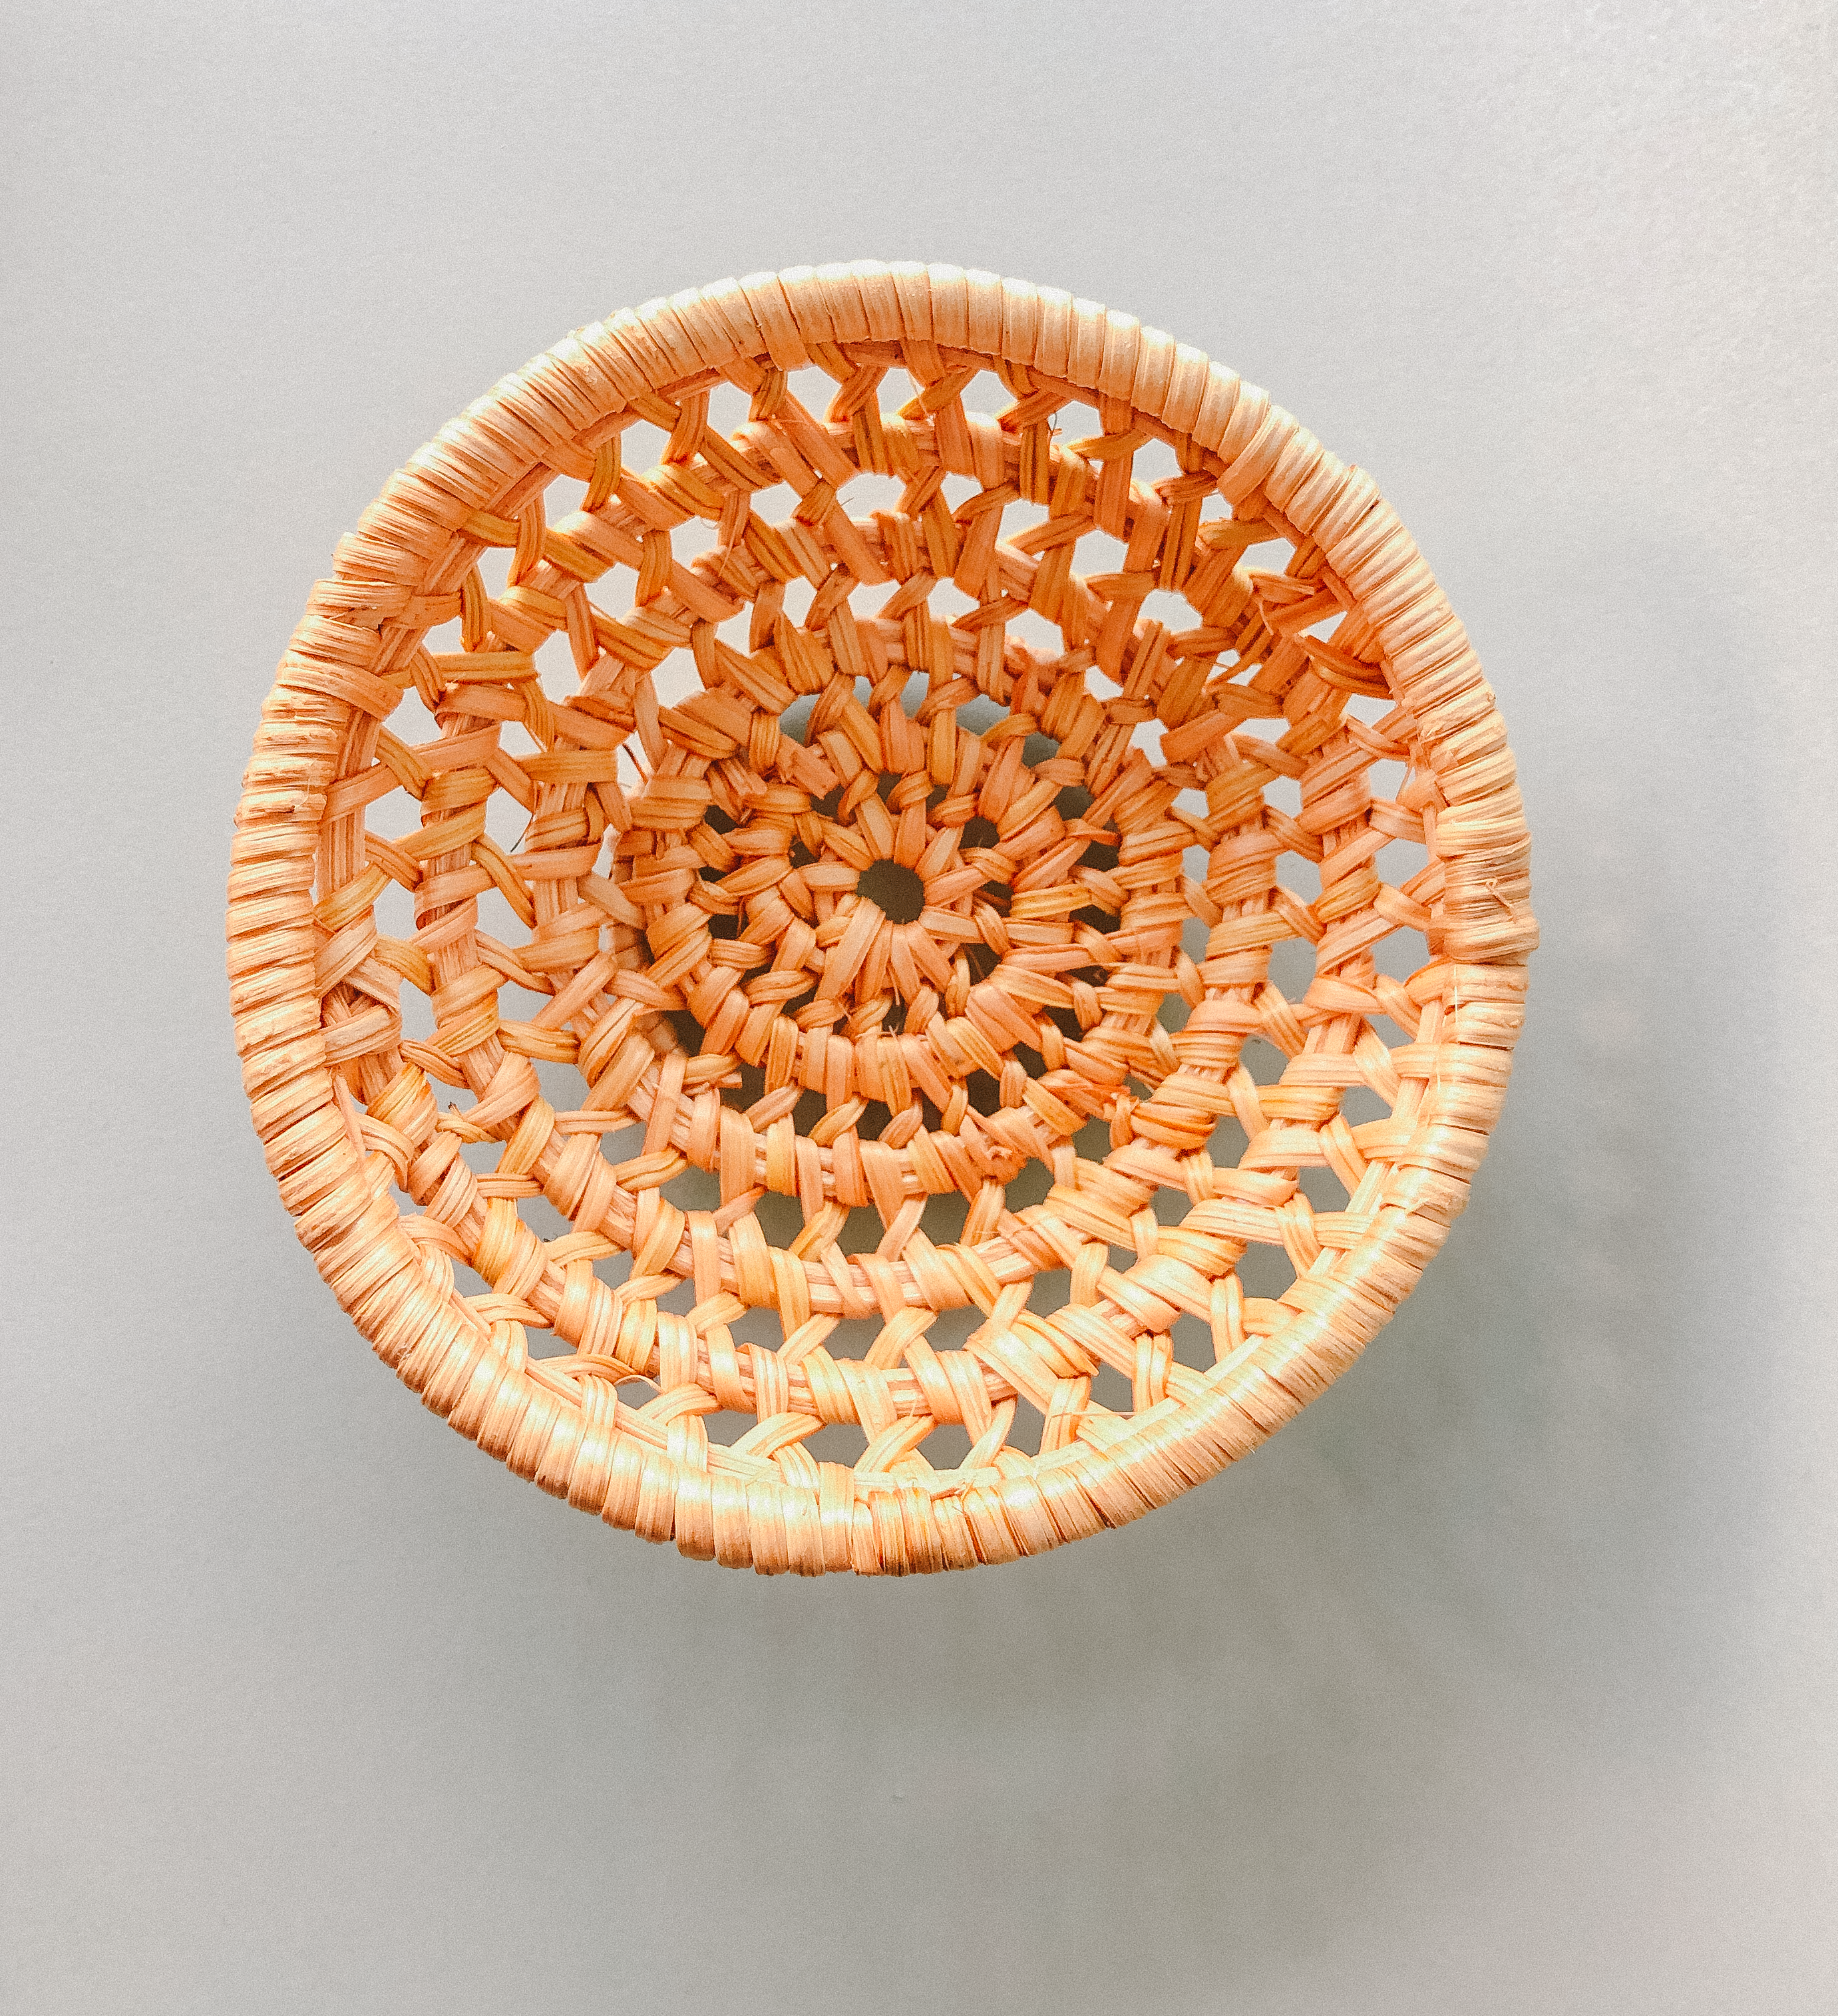 Handwoven Rattan Basket Coasters  by PROSE Tabletop